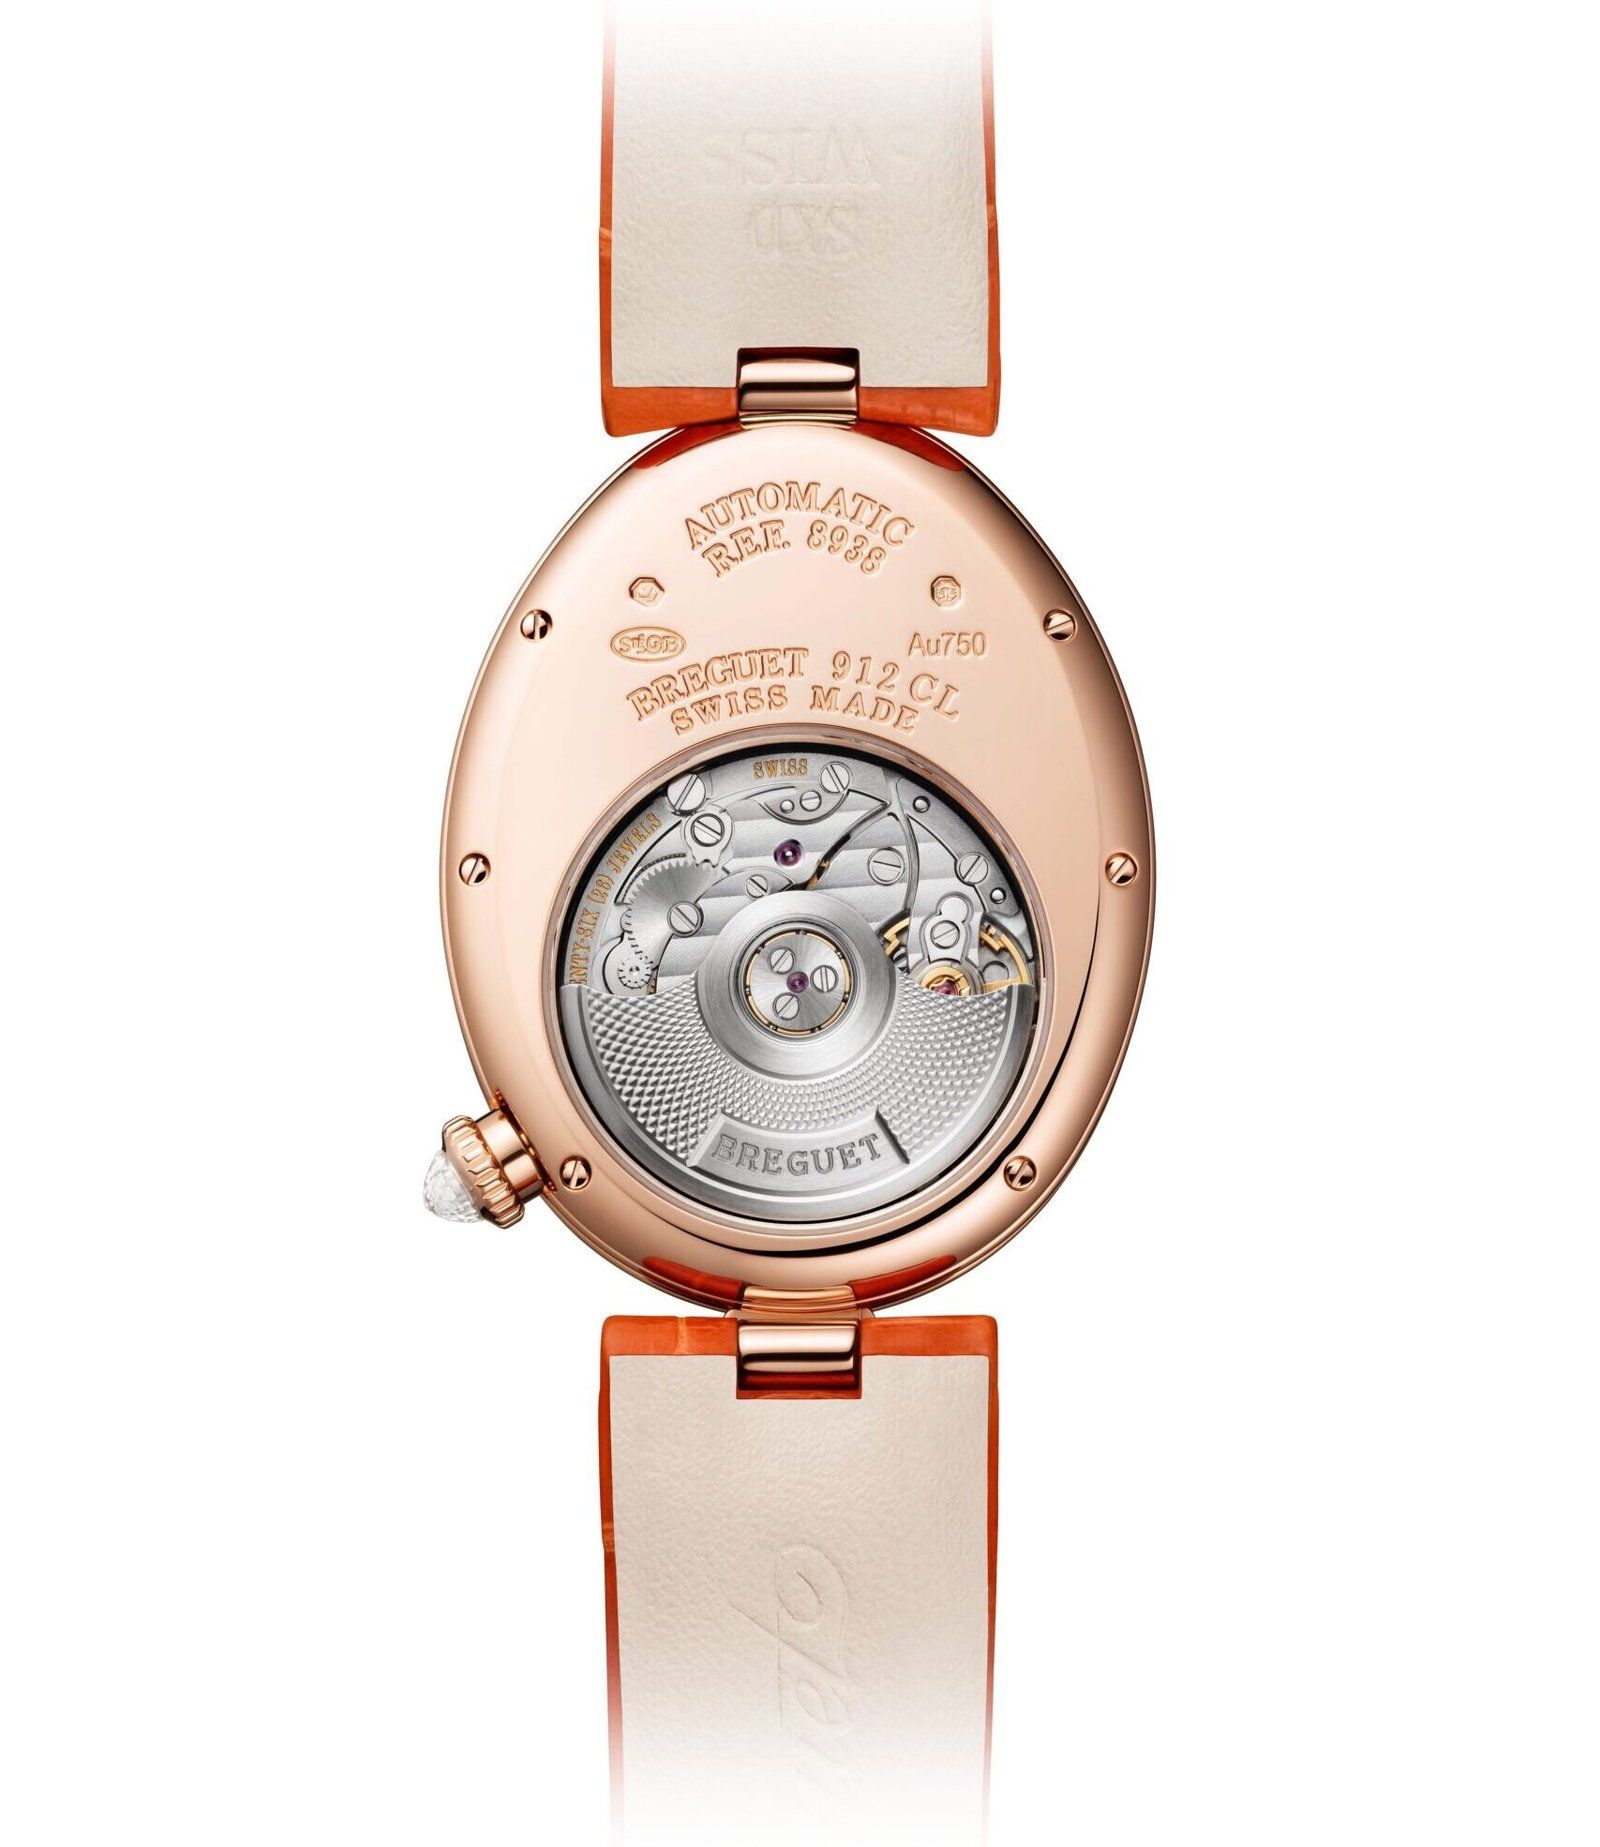 Mother’s Day 2022 : Gifting Guide Of 6 Luxury Watches - Part 2